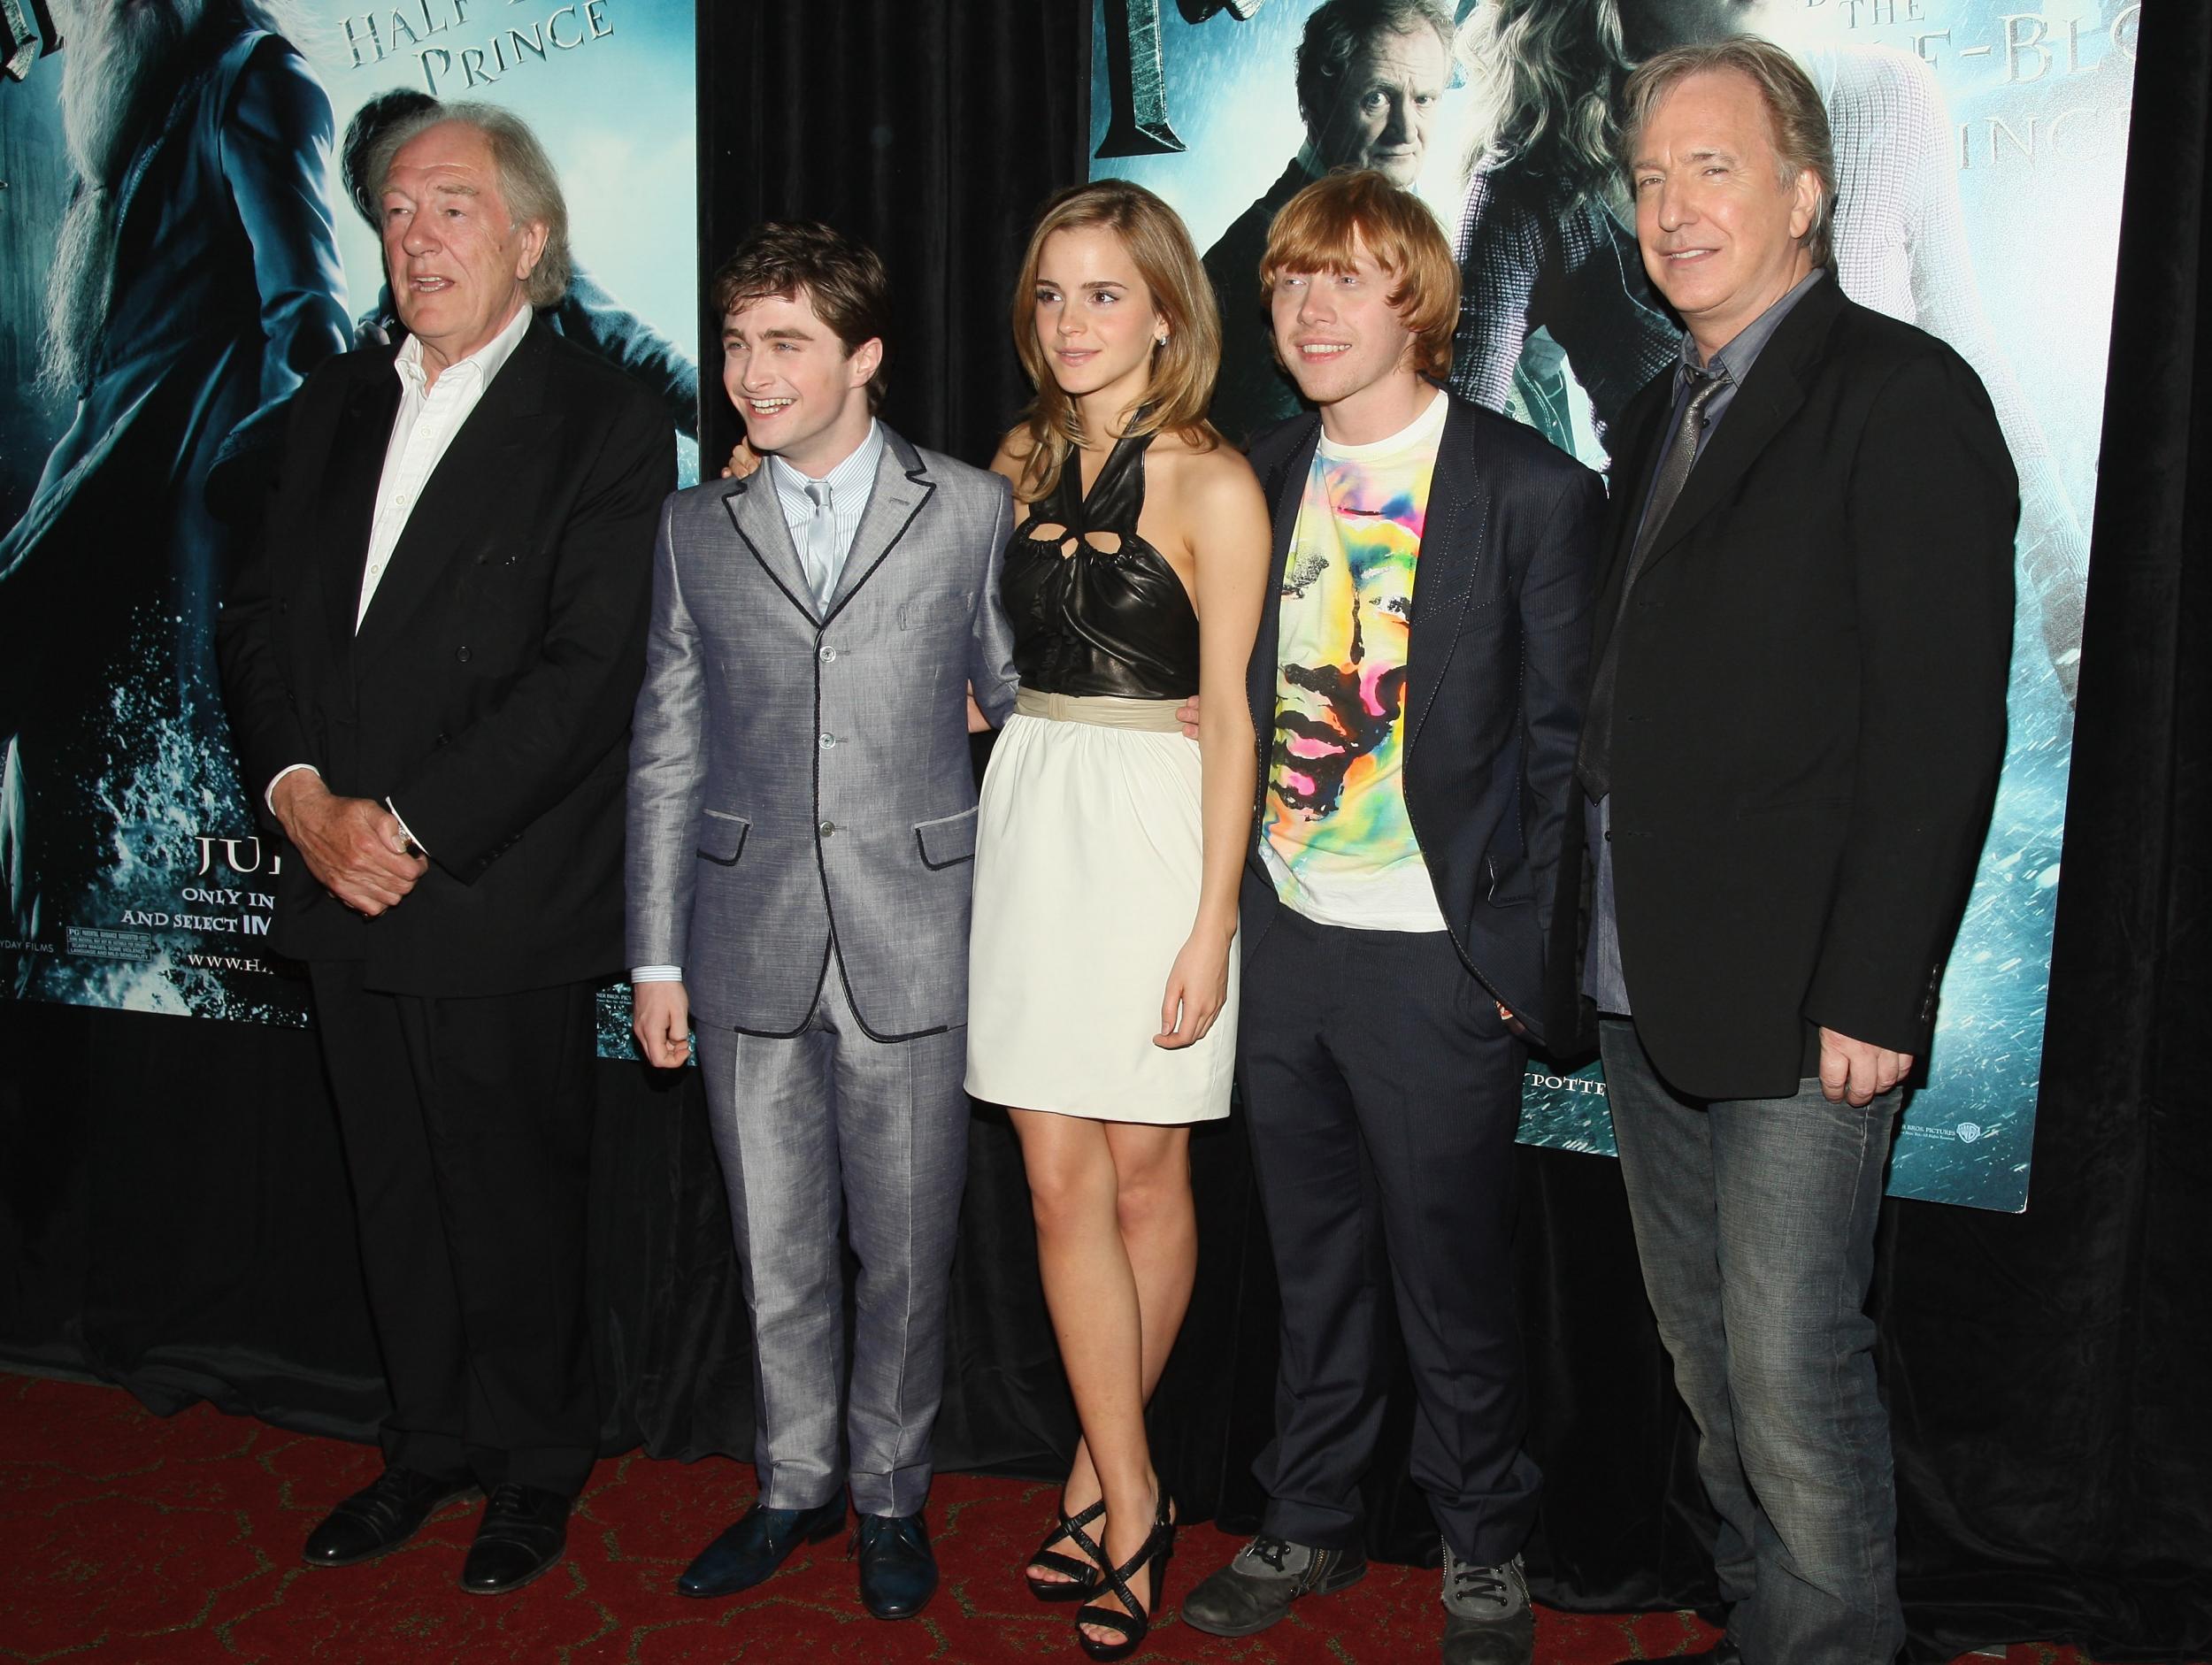 Michael Gambon, Daniel Radcliffe, Emma Watson, Rupert Grint and Alan Rickman at the New York premiere for Harry Potter and the Half-Blood Prince in 2009